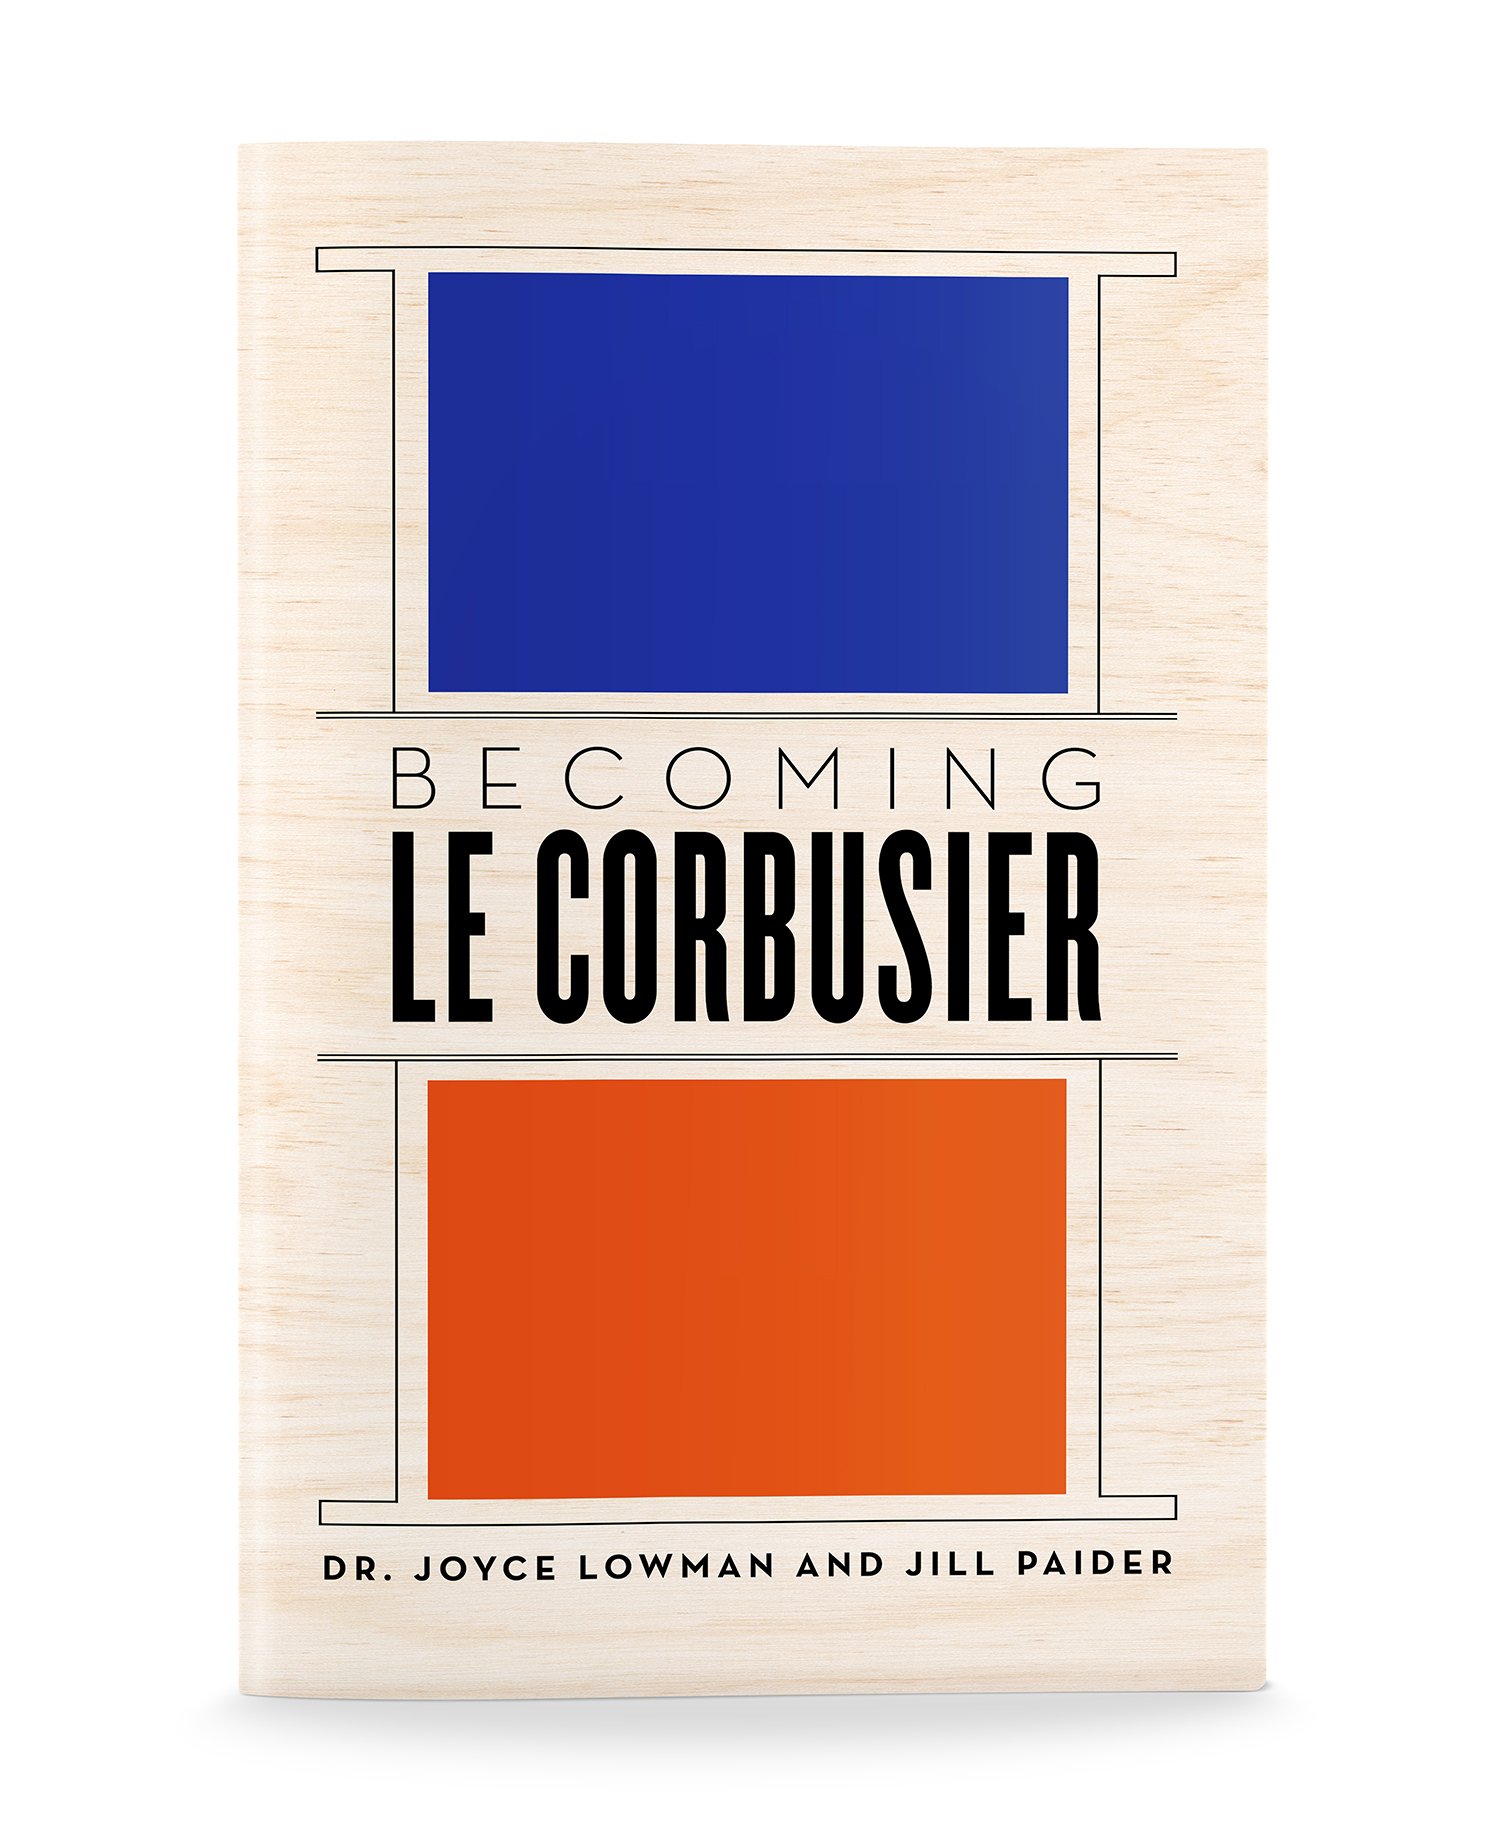 BECOMING LE CORBUSIER